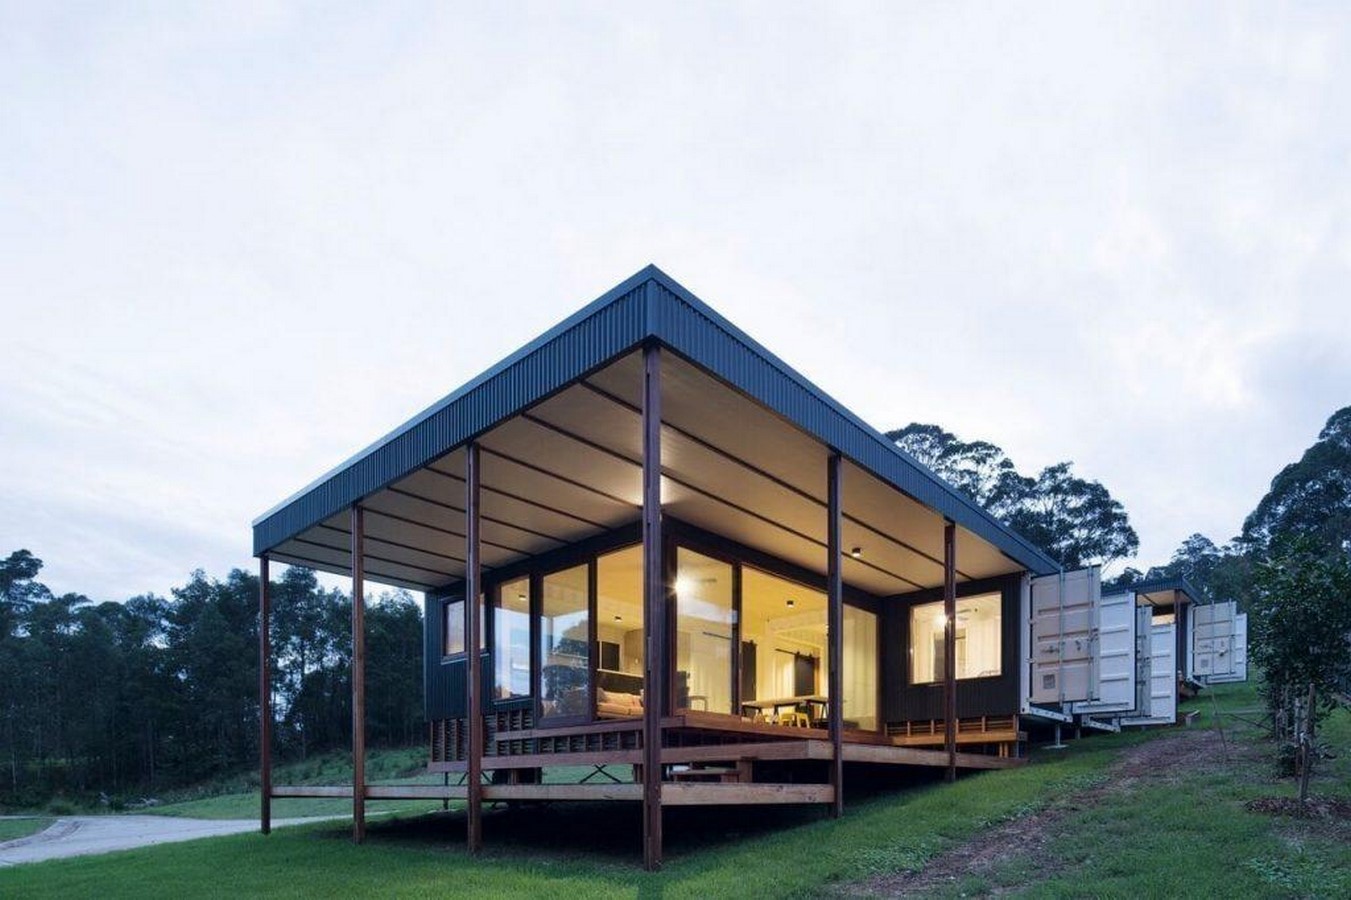 15 Best Examples of Using Shipping Containers for Home Building - Sheet6